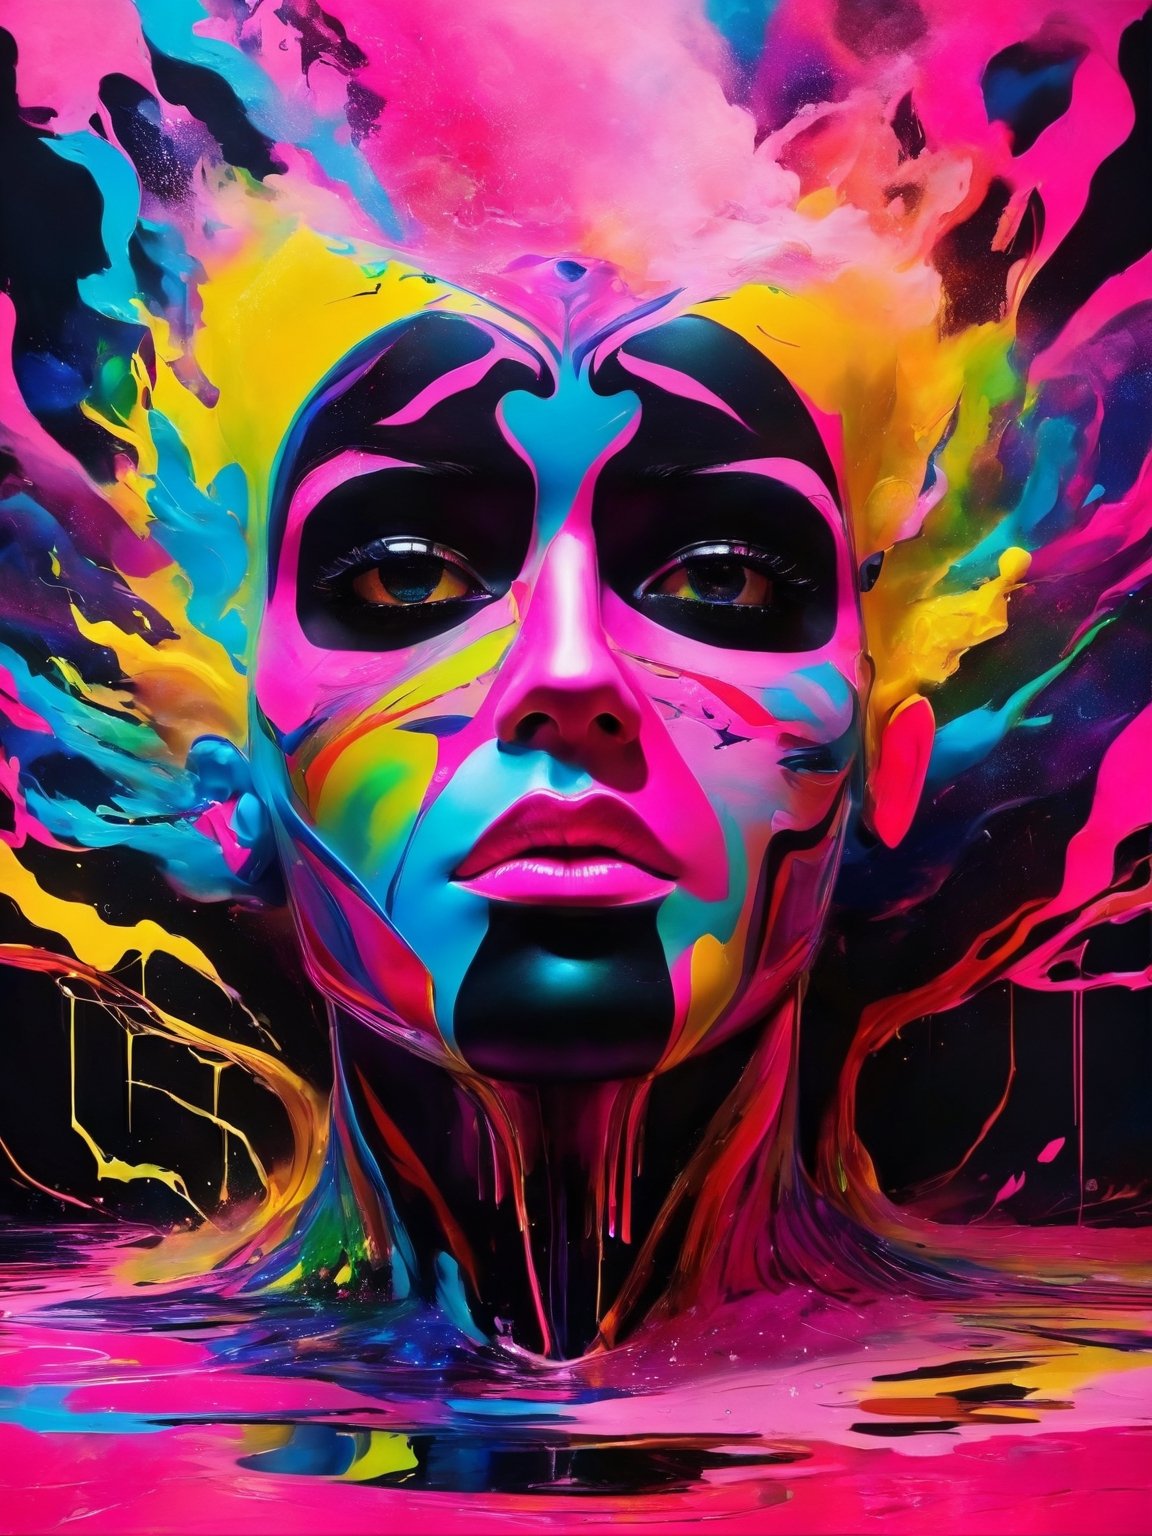 (best quality, 4k, 8k, highres, masterpiece:1.2), ultra-detailed, psychology, manipulation, dark, pink, colorful, powerful, contrasting, emotive, expressive, stylized, realistic, high contrast, dramatic lighting, surreal elements, layered textures, abstract background, vibrant tones, love symbol, man's face obscured, complex emotions, hidden motives, vivid colors, transformative, subconscious desires, deep symbolism, human psyche analyzed, intense gaze, sinister aura, surrealistic atmosphere, figurative art, emotional manipulation, conflicting emotions, ambiguous storyline, hidden meanings, strong impact, provocative composition, intricate details, meaningful expressions, great understanding, fascinating portrayal, mesmerizing artwork, masterpiece in pink shades